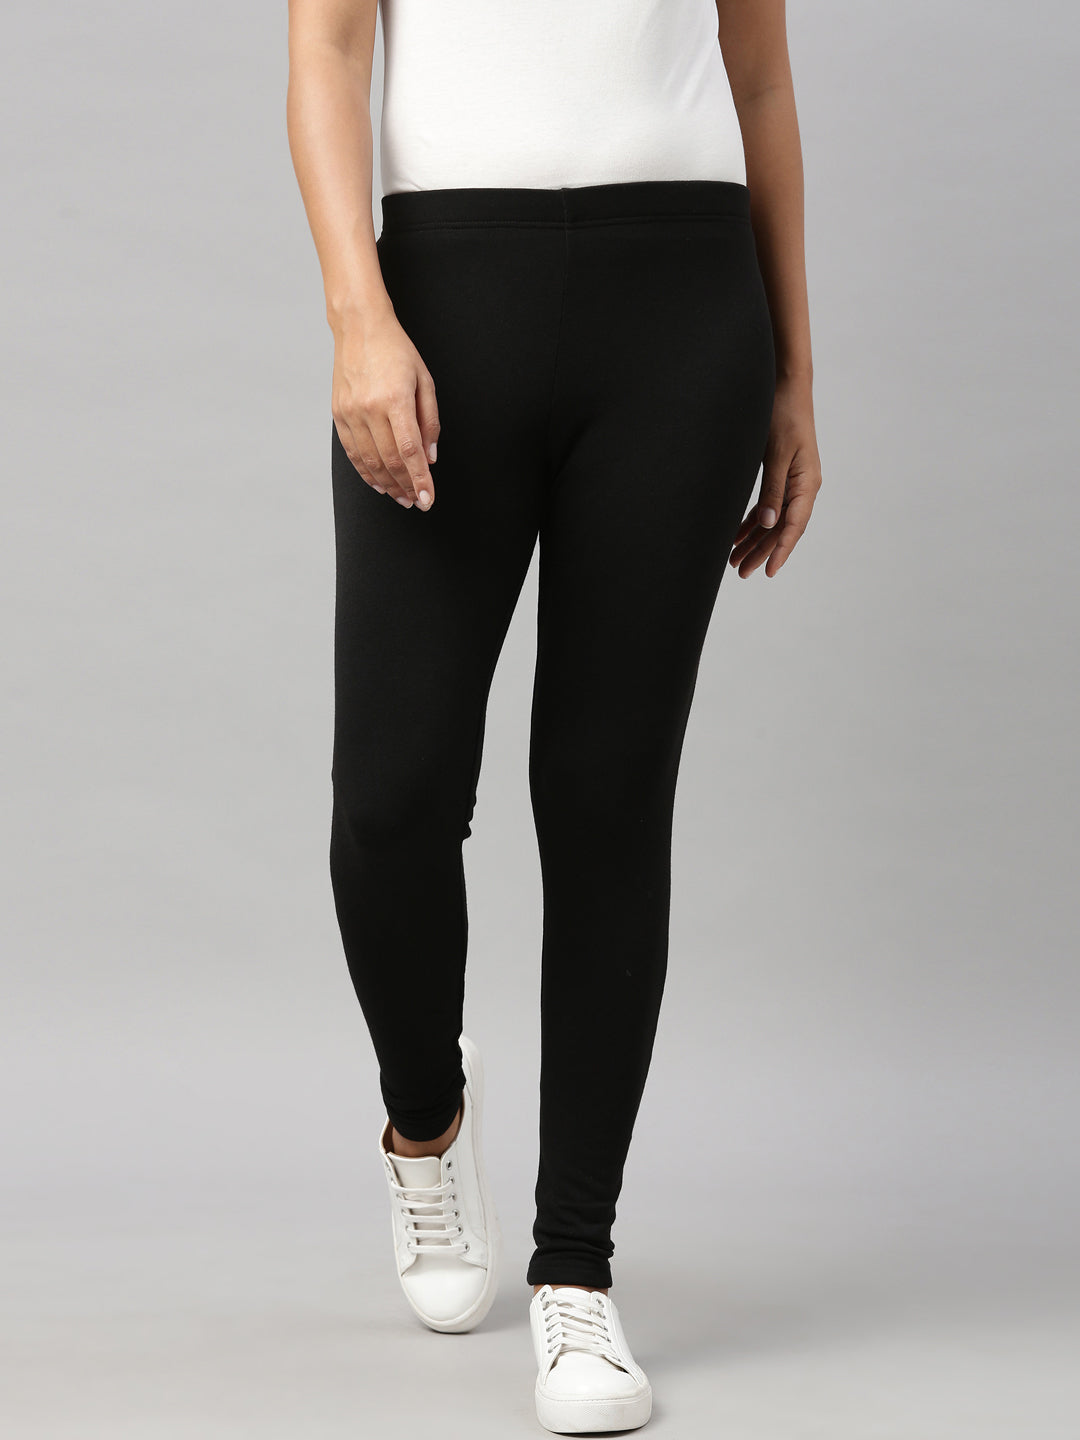 My Favorite Leggings for Keeping Warm During the Winter Are 50% Off